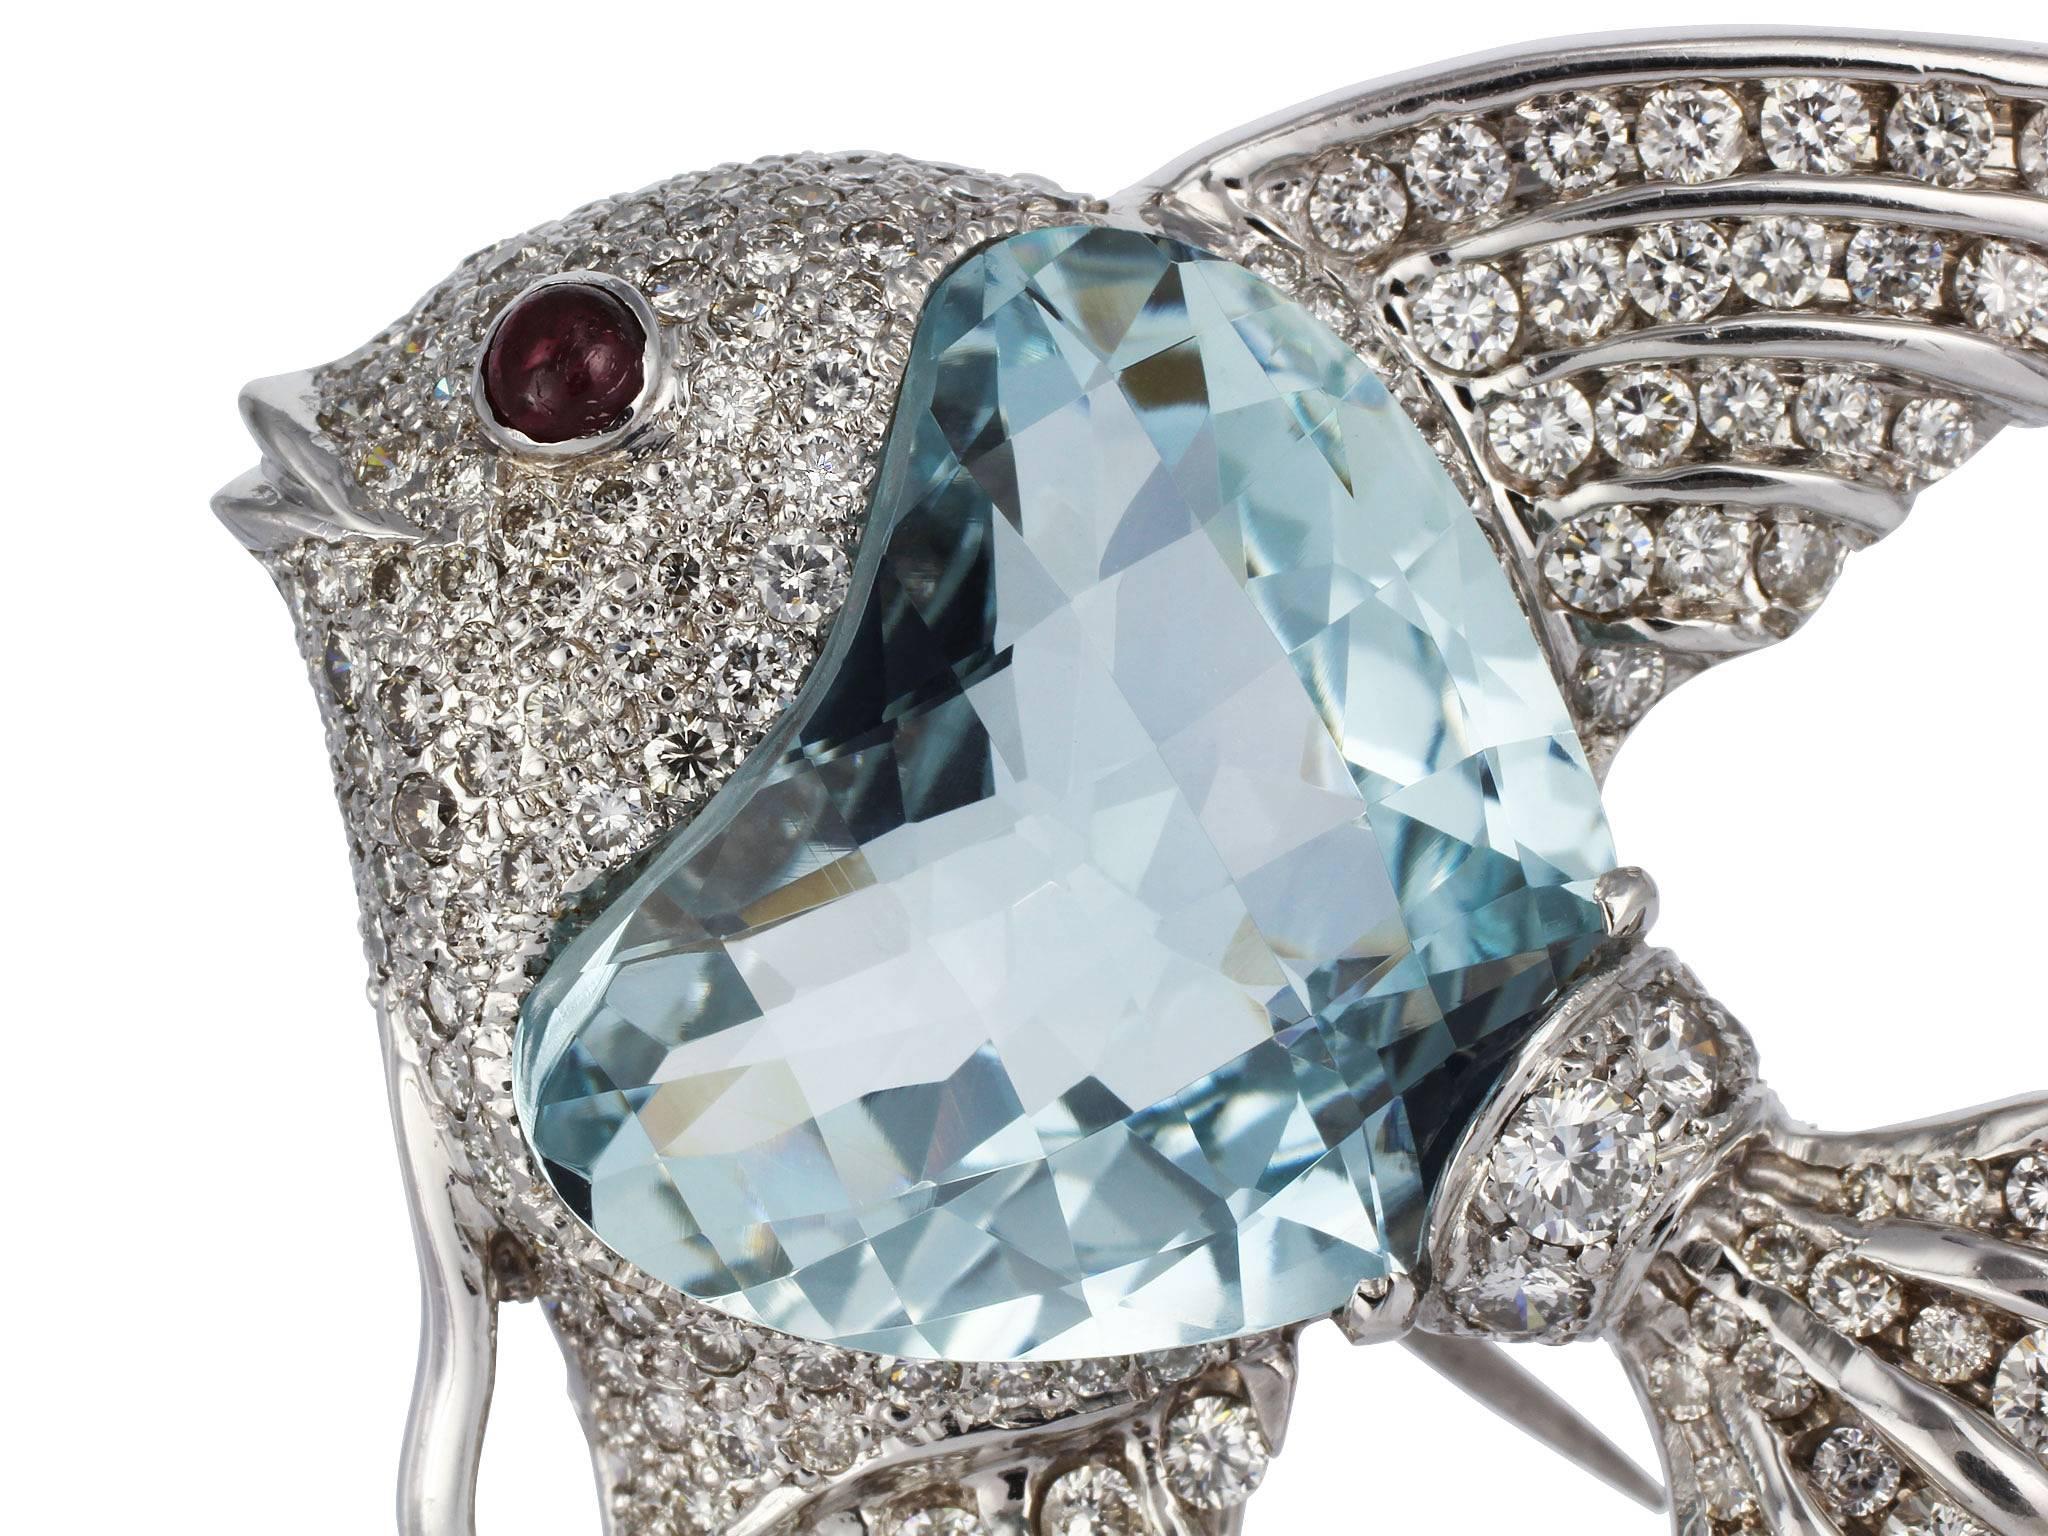 18 karat white gold angelfish pin consisting of of one fantasy cut aquamarine weighing approximately 24.00 carats, channel and pave set round brilliant cut diamonds having an approximate total weight of 8.00 carats and a single cabochon ruby eye. 